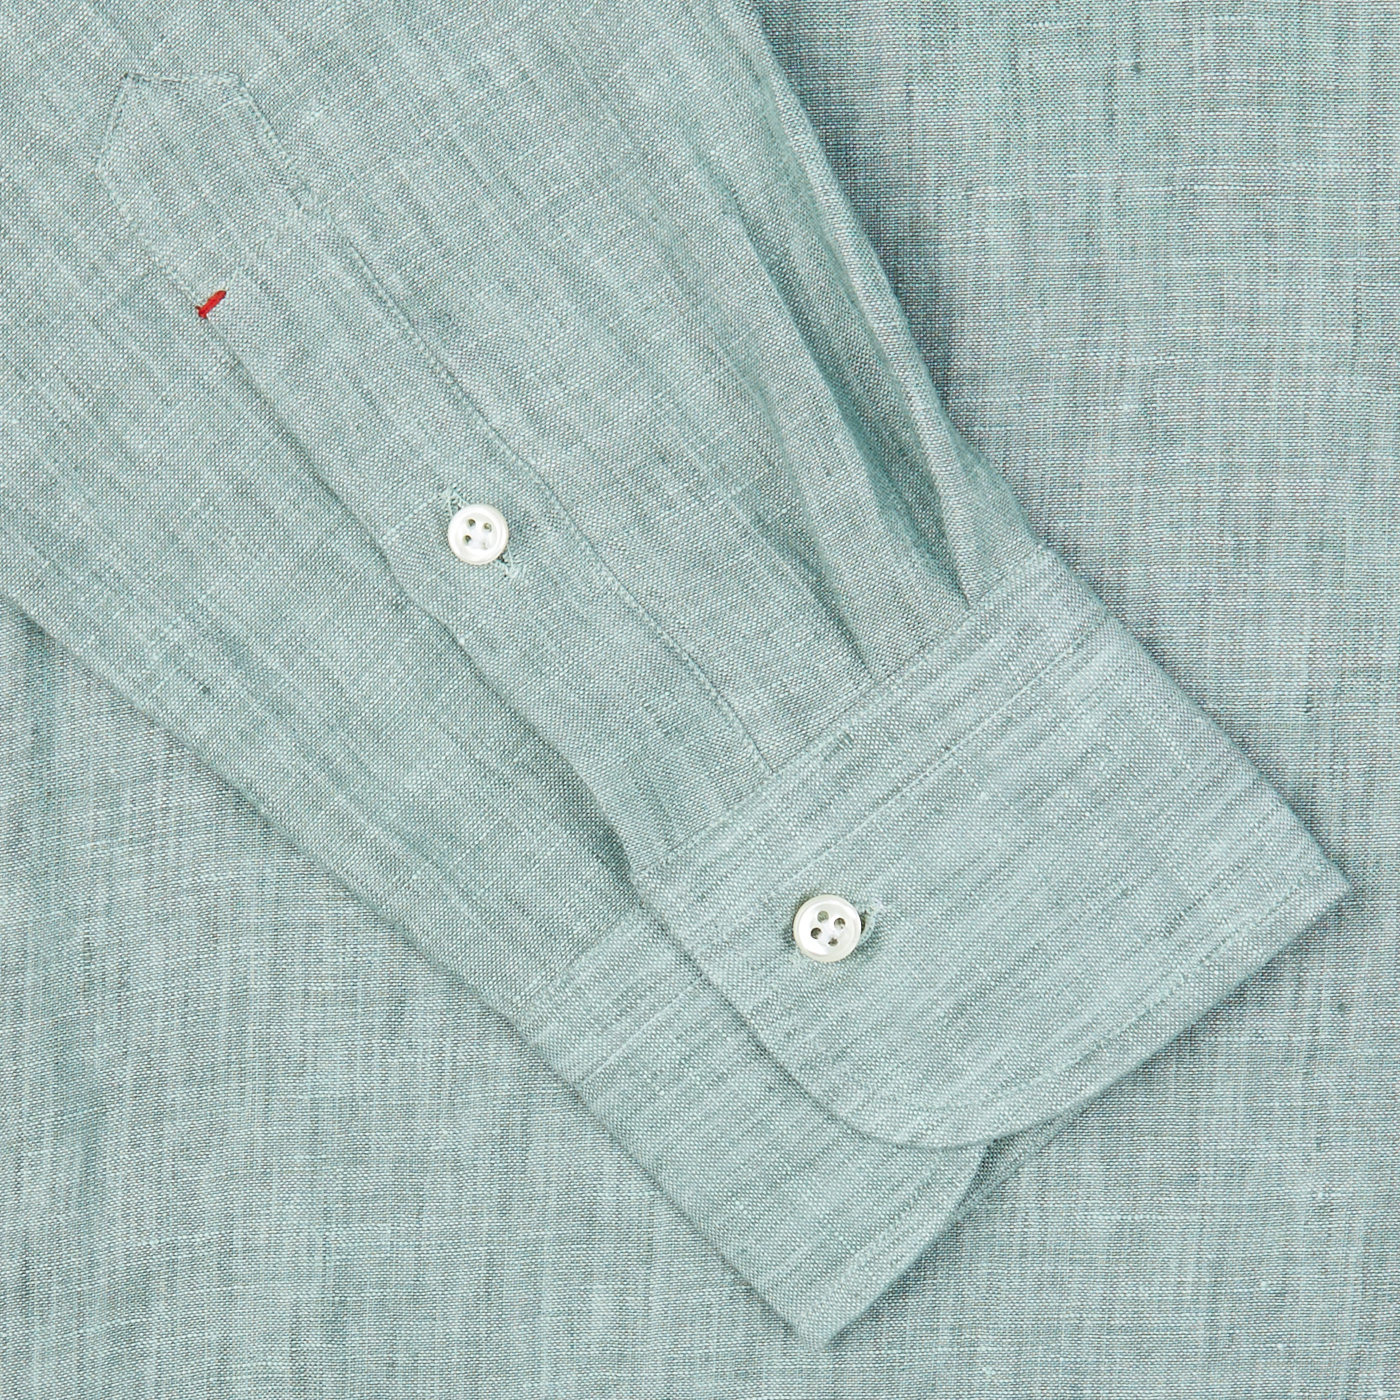 Close-up of a Mazzarelli Teal Green Organic Linen BD Slim Shirt's cuff with two white buttons.